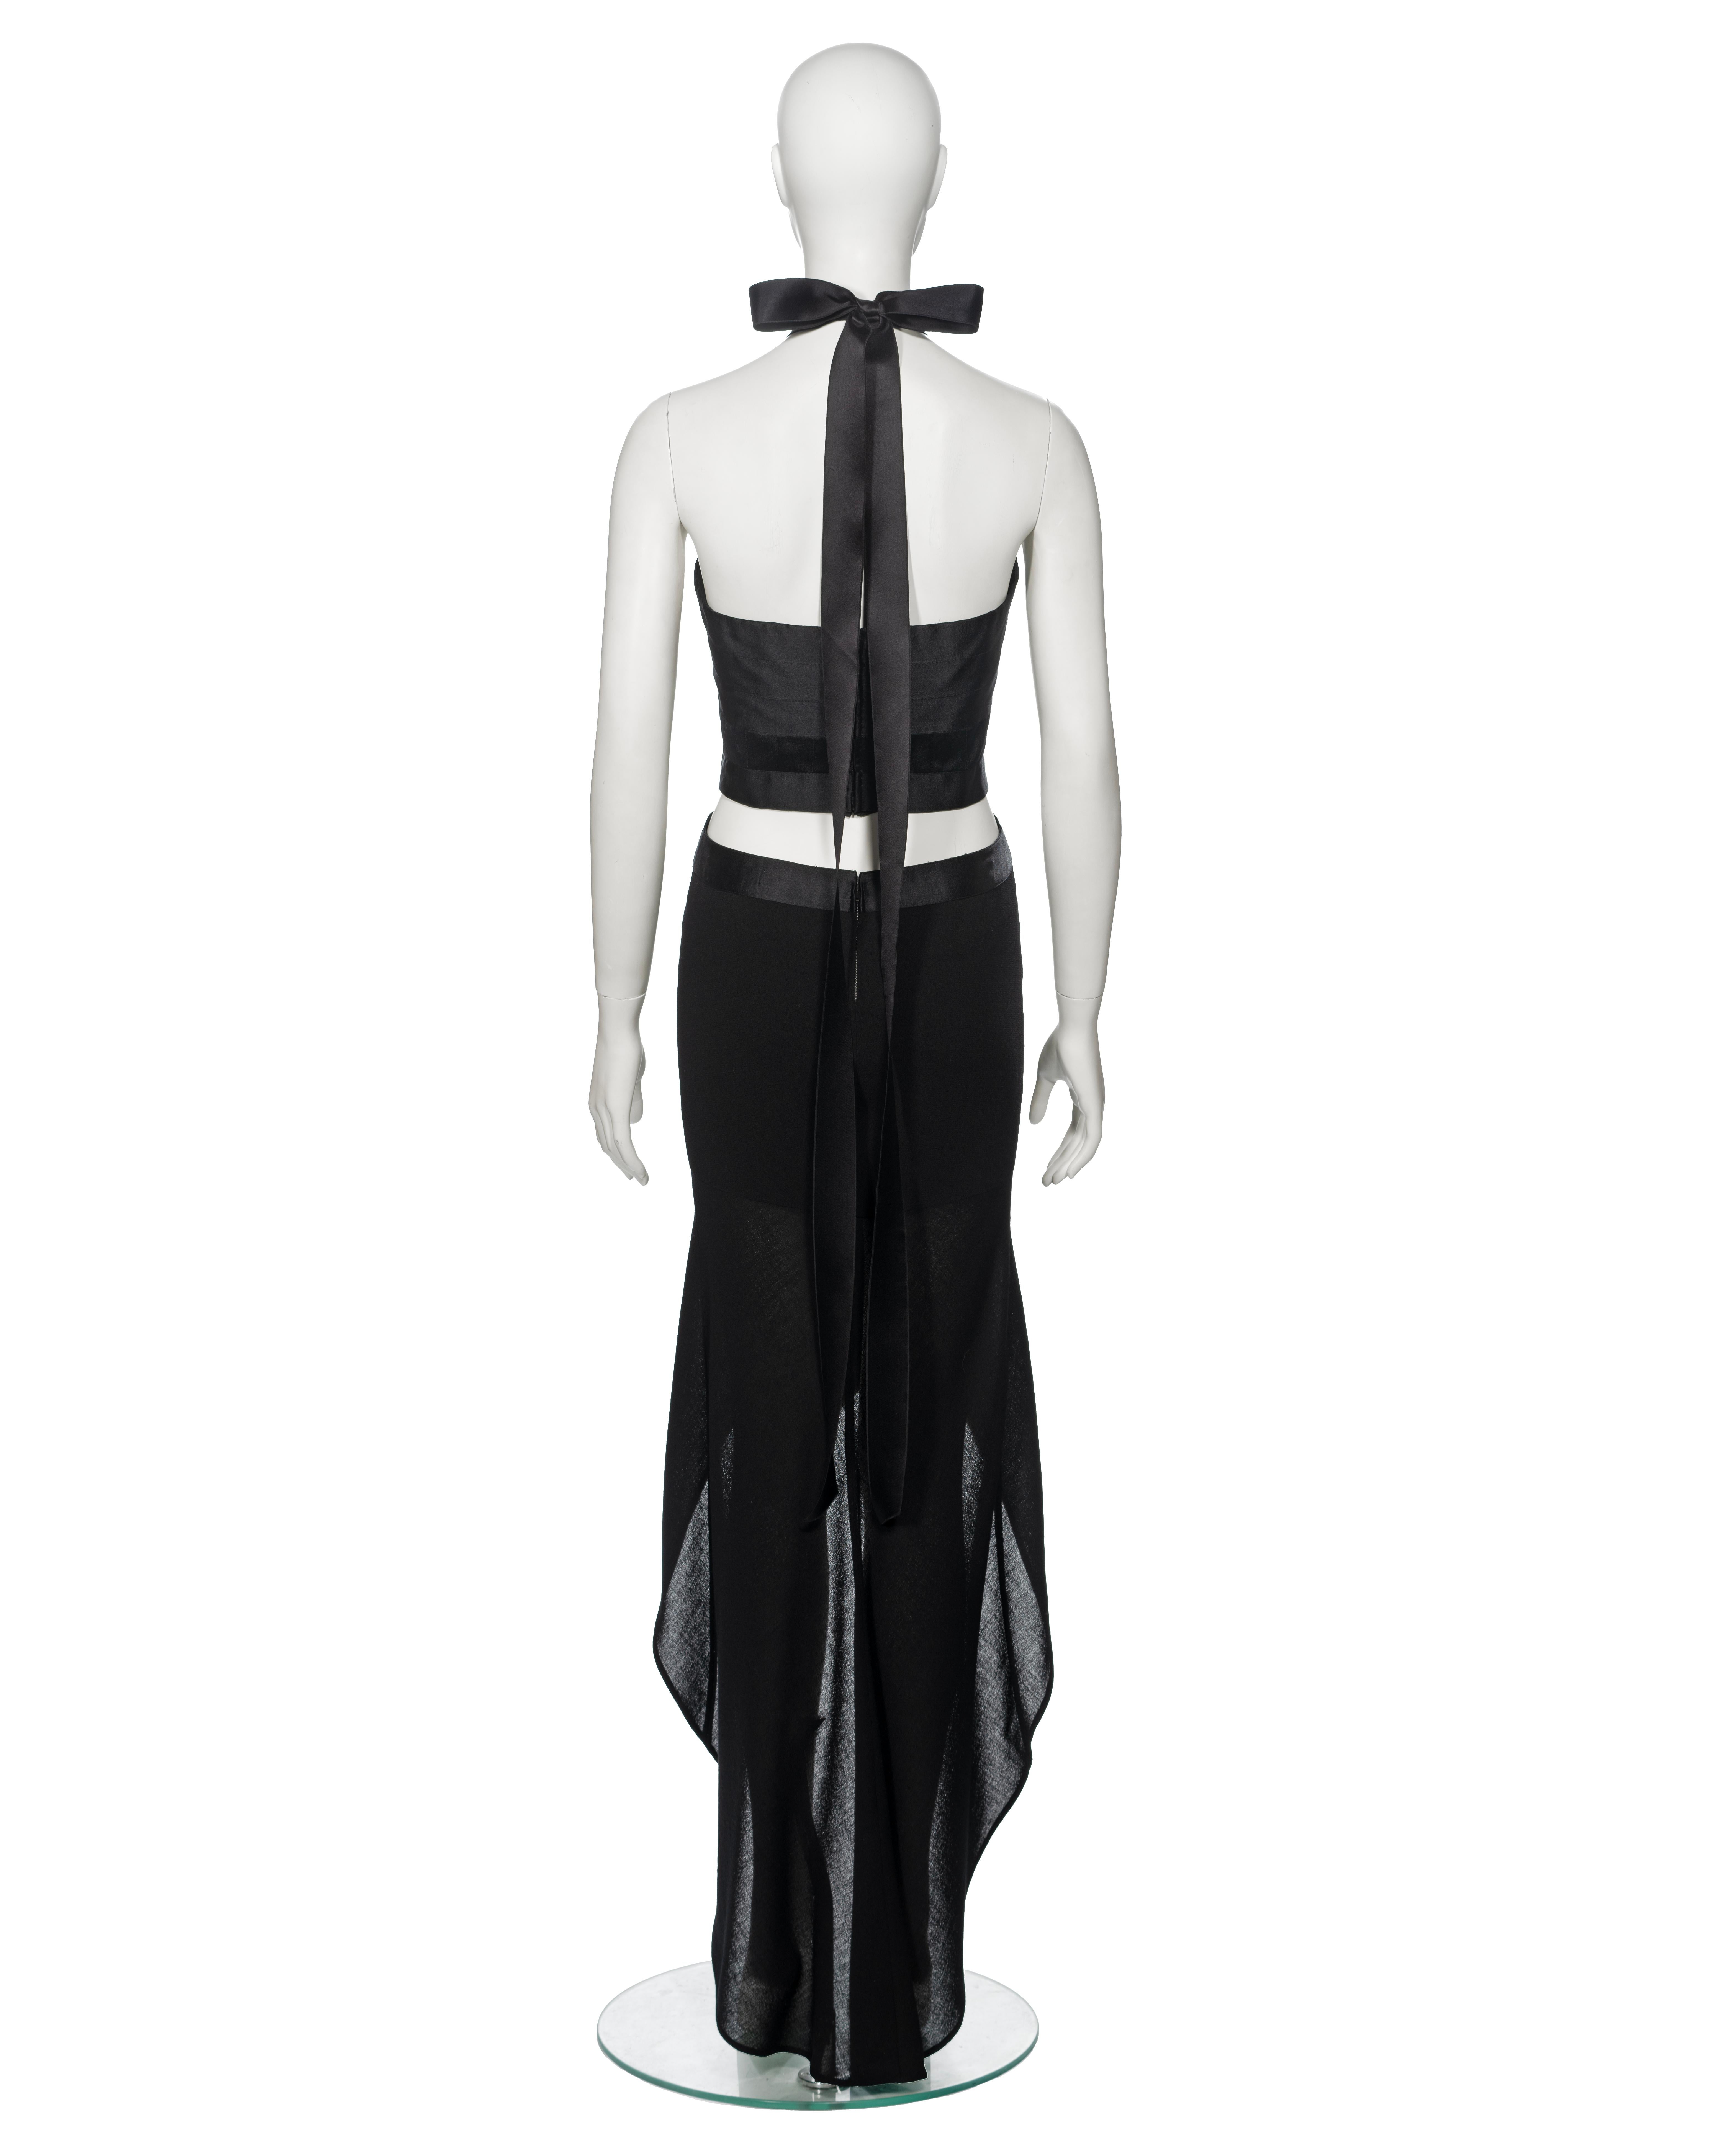 Chanel by Karl Lagerfeld Haute Couture Black Silk Evening Dress, fw 1994 For Sale 9